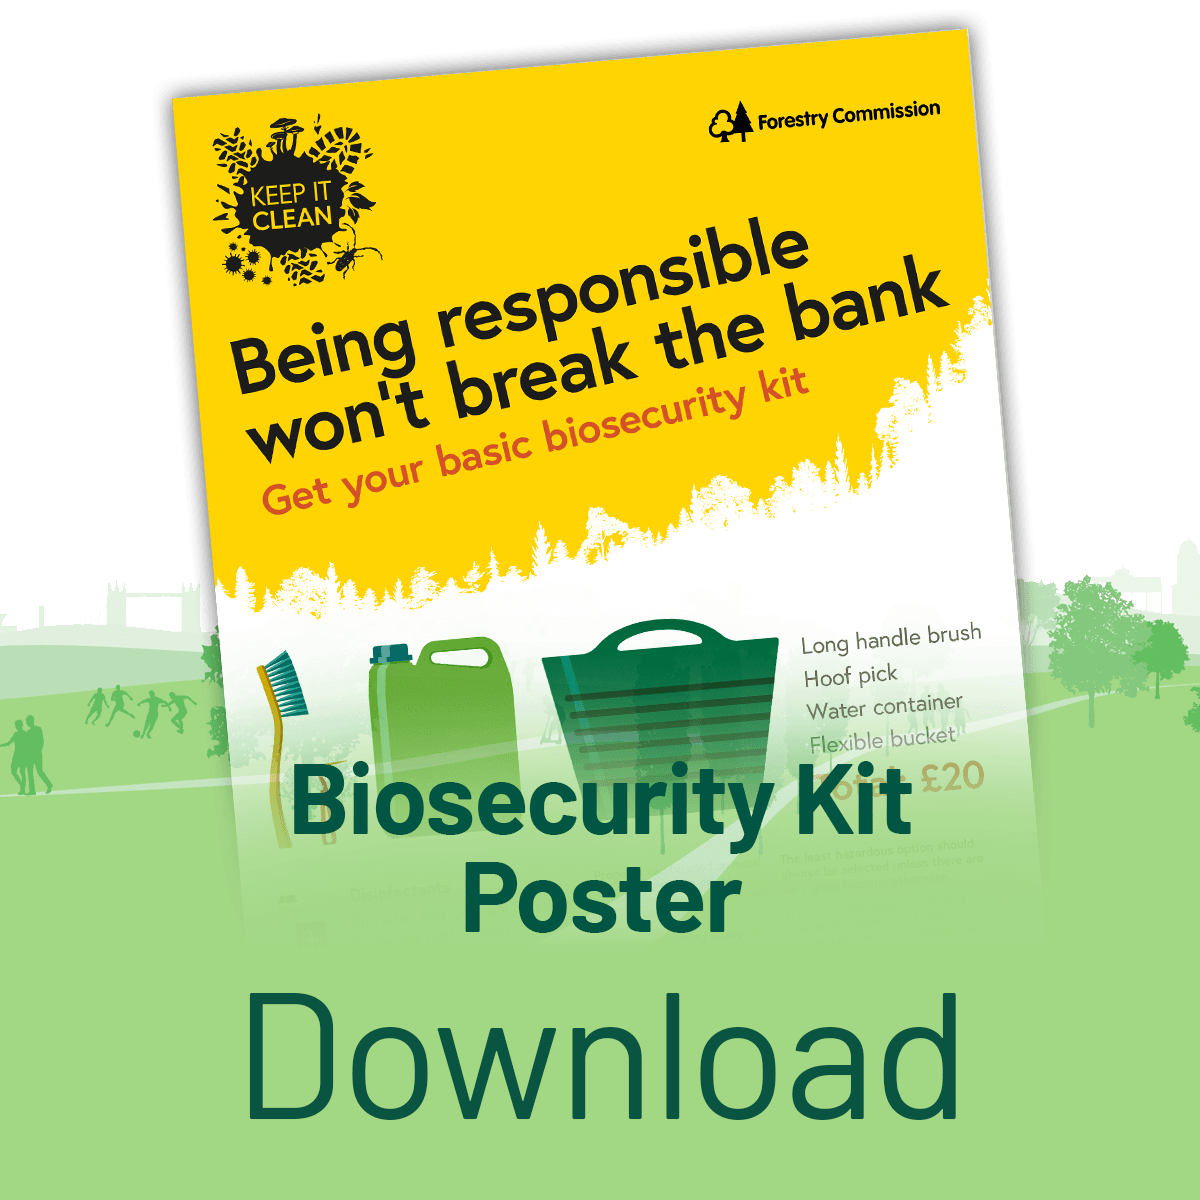 Download the Biosecurity Kit Poster